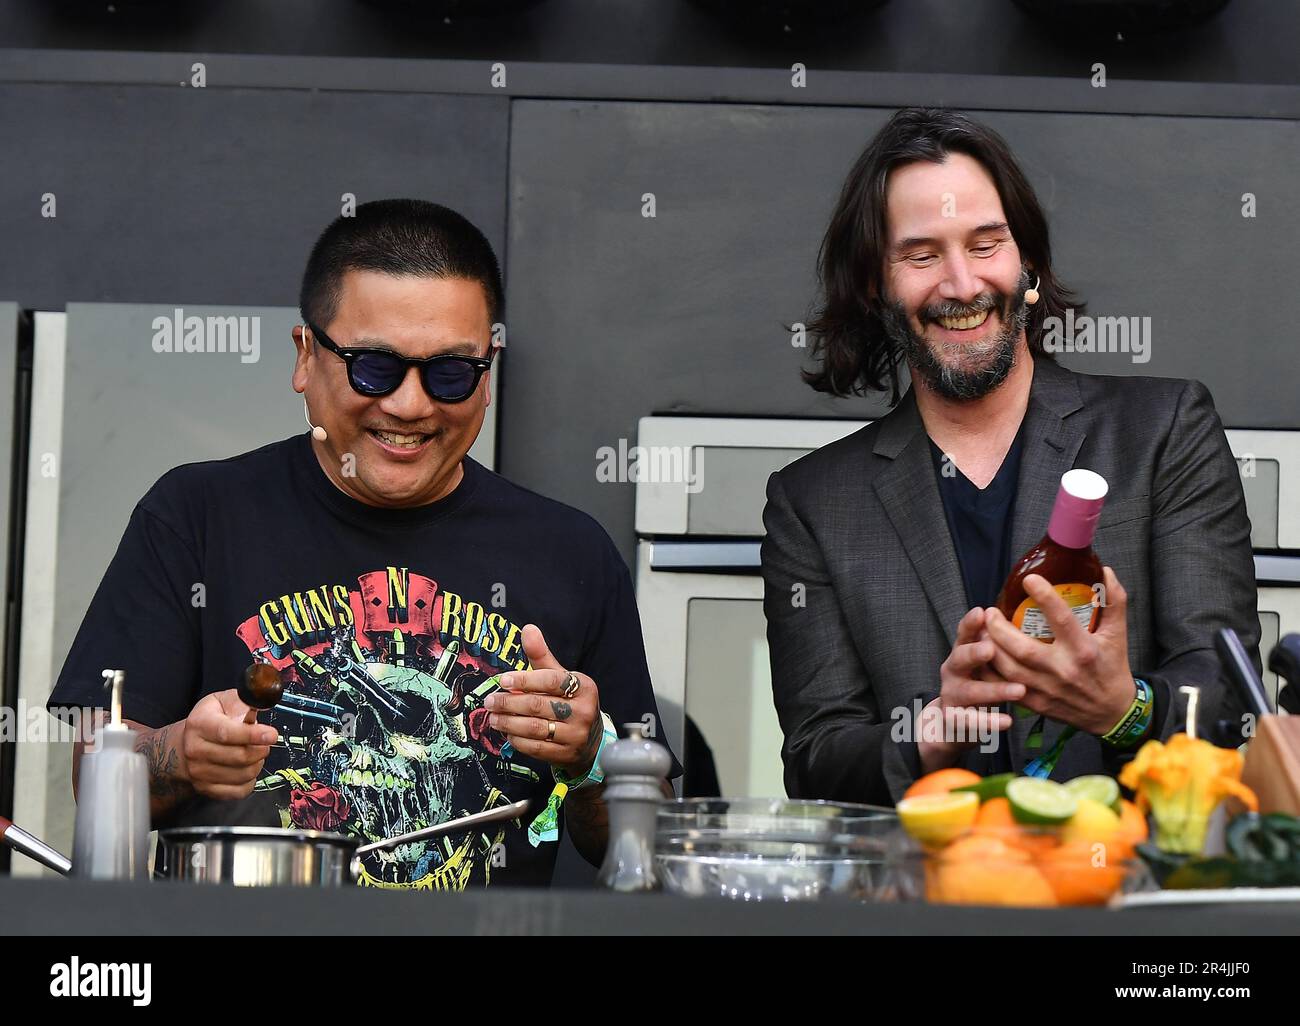 https://c8.alamy.com/comp/2R4JJF0/roy-choi-keanu-reeves-seen-onstage-at-the-william-sonoma-culinary-stage-during-bottlerock-at-napa-valley-expo-on-may-27-2023-in-napa-california-photo-casey-flaniganimagespace-2R4JJF0.jpg